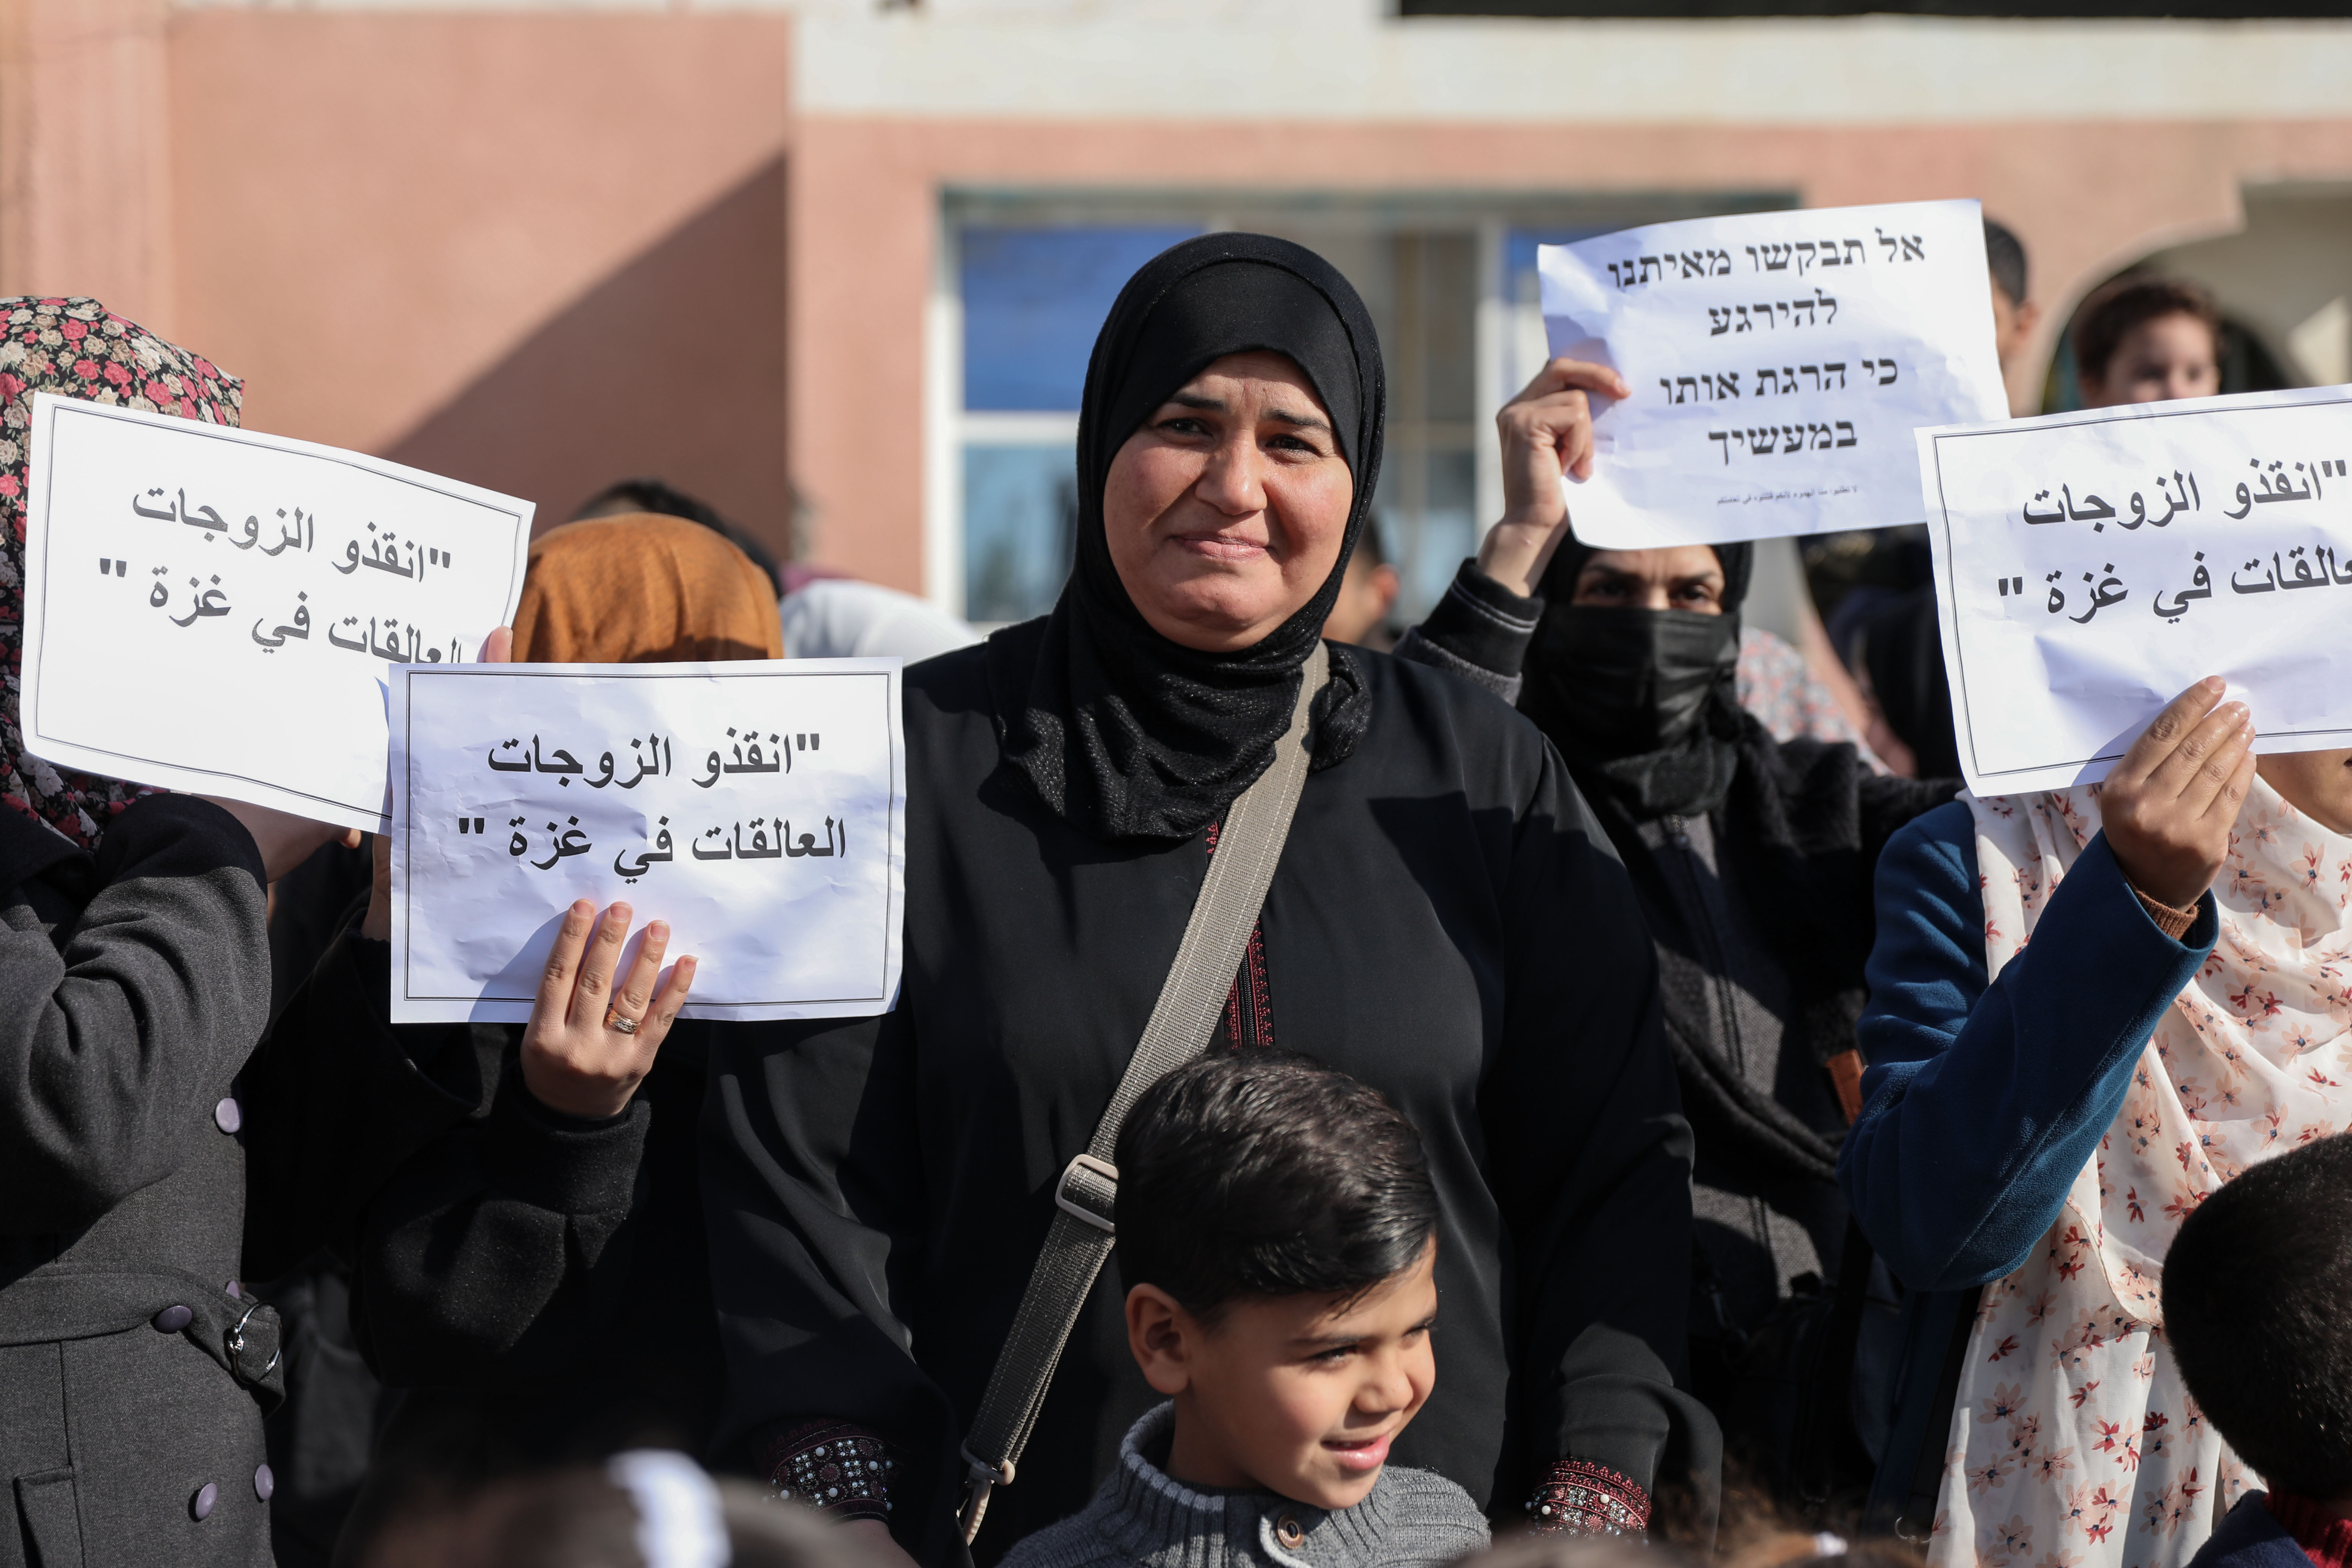 Palestinians protest against Israel's "separation policy" in northern Gaza on 17 January 2023 (MEE/Mohammed al-Hajjar)